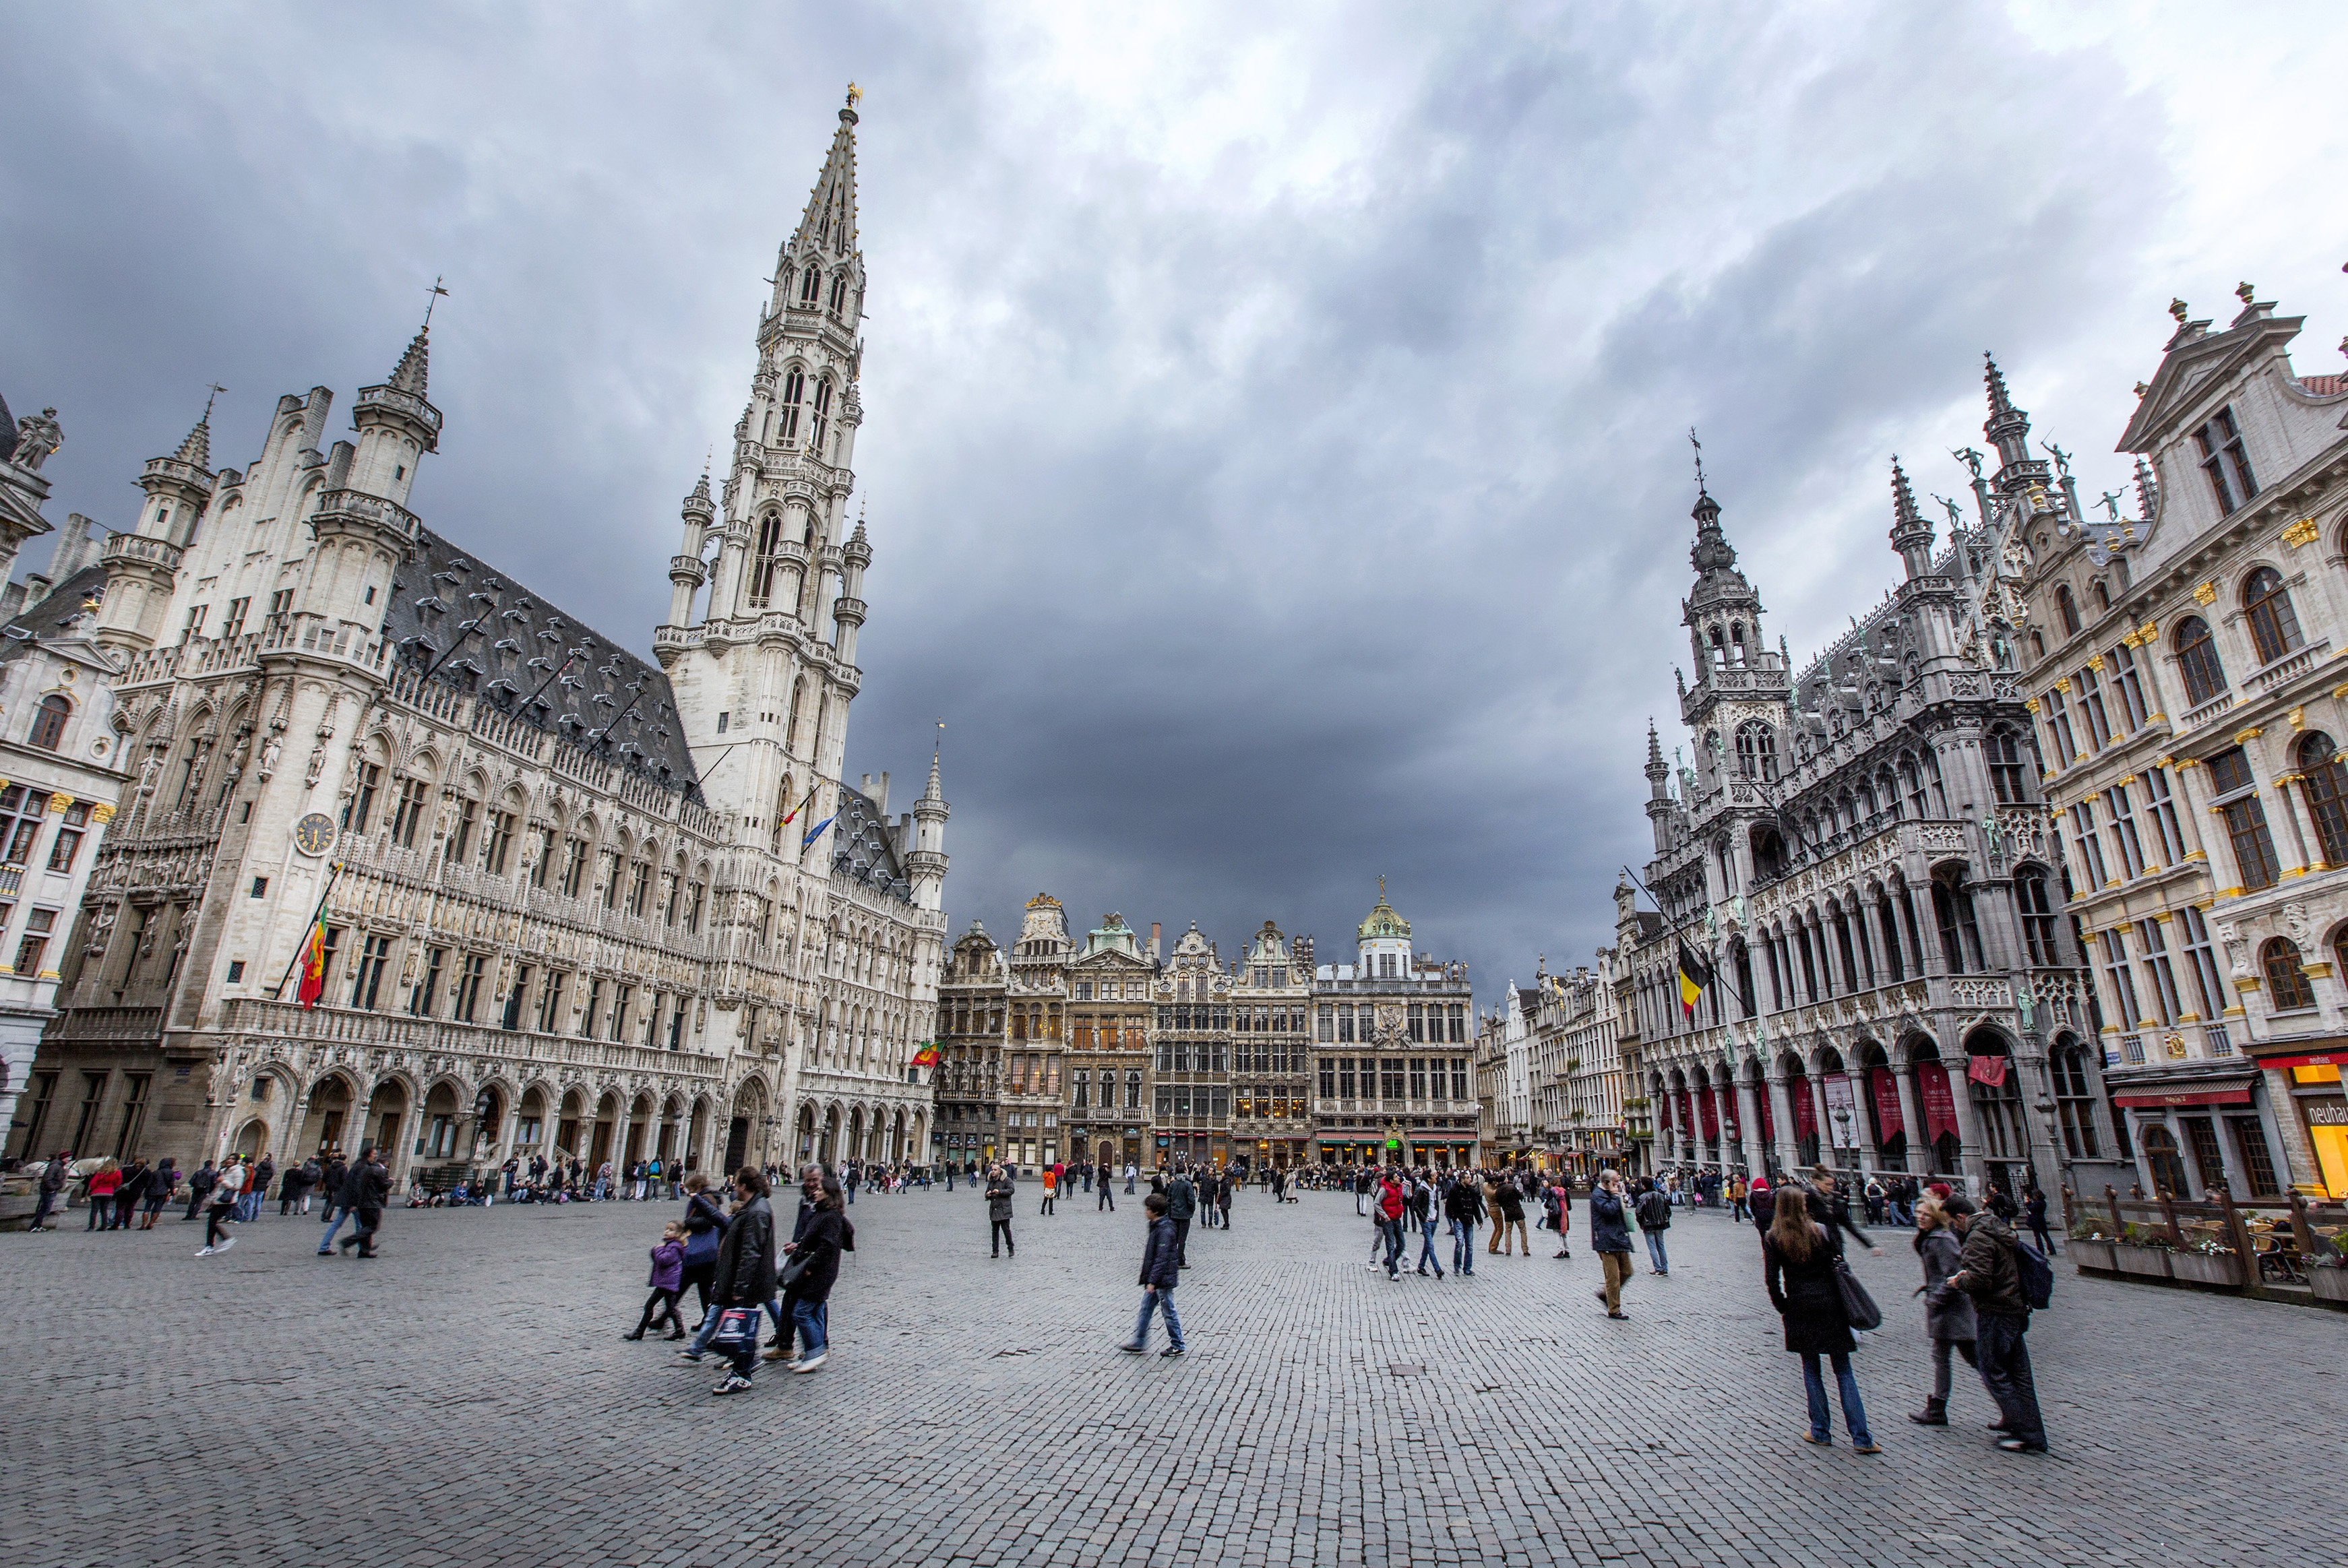 Grand-Place - Grote Markt